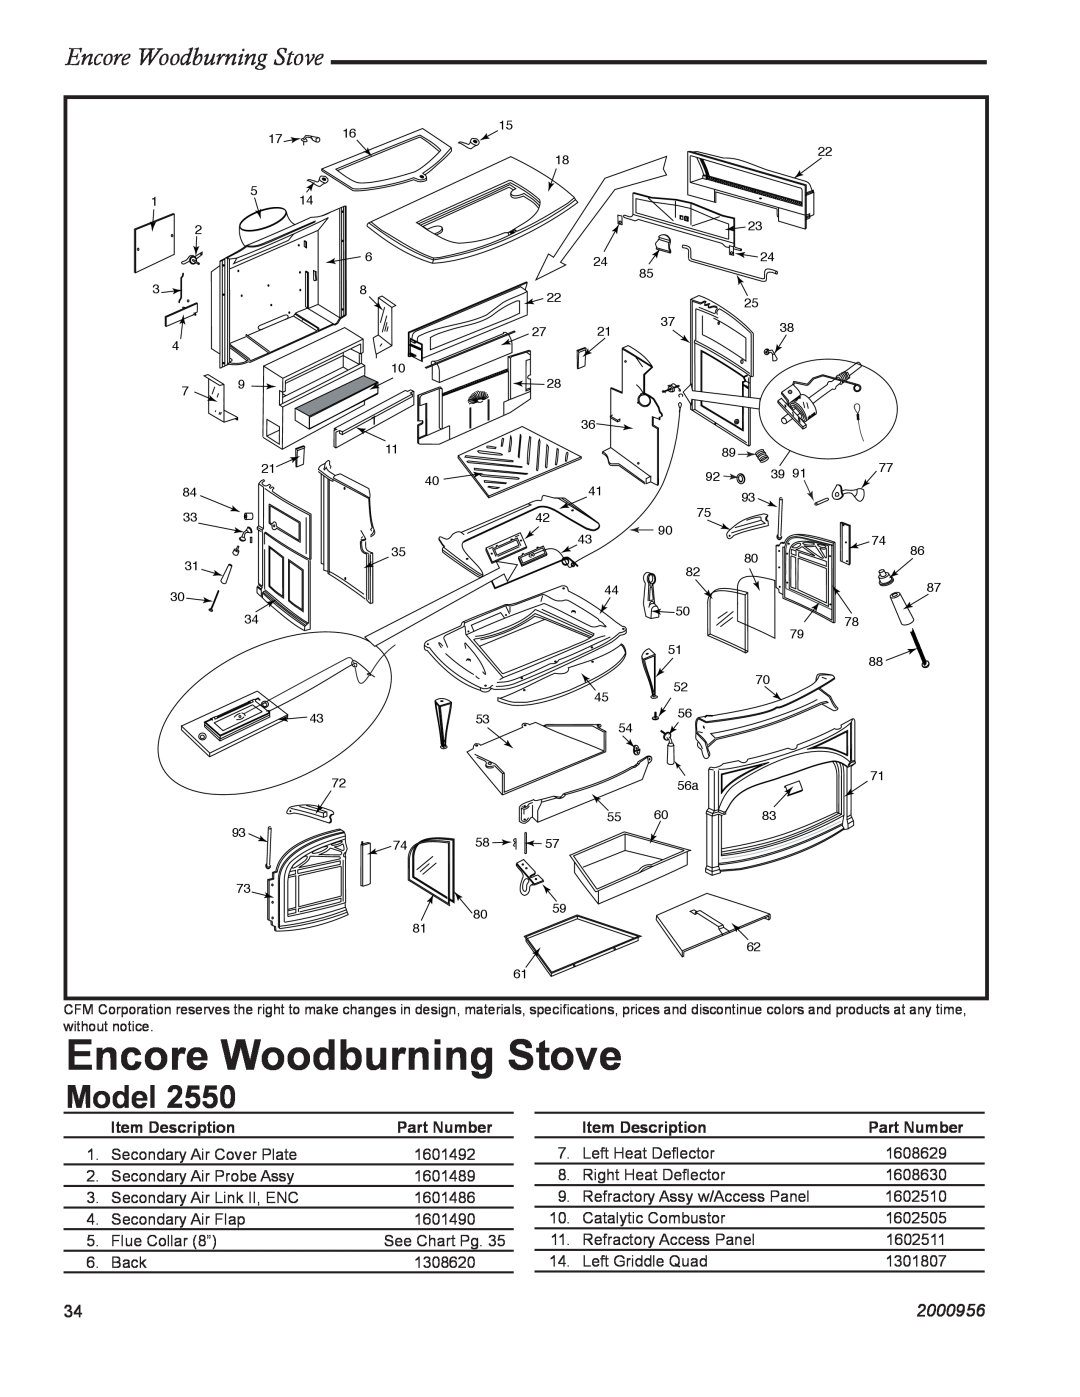 Vermont Casting 2550 installation instructions Model, Encore Woodburning Stove, 2000956 